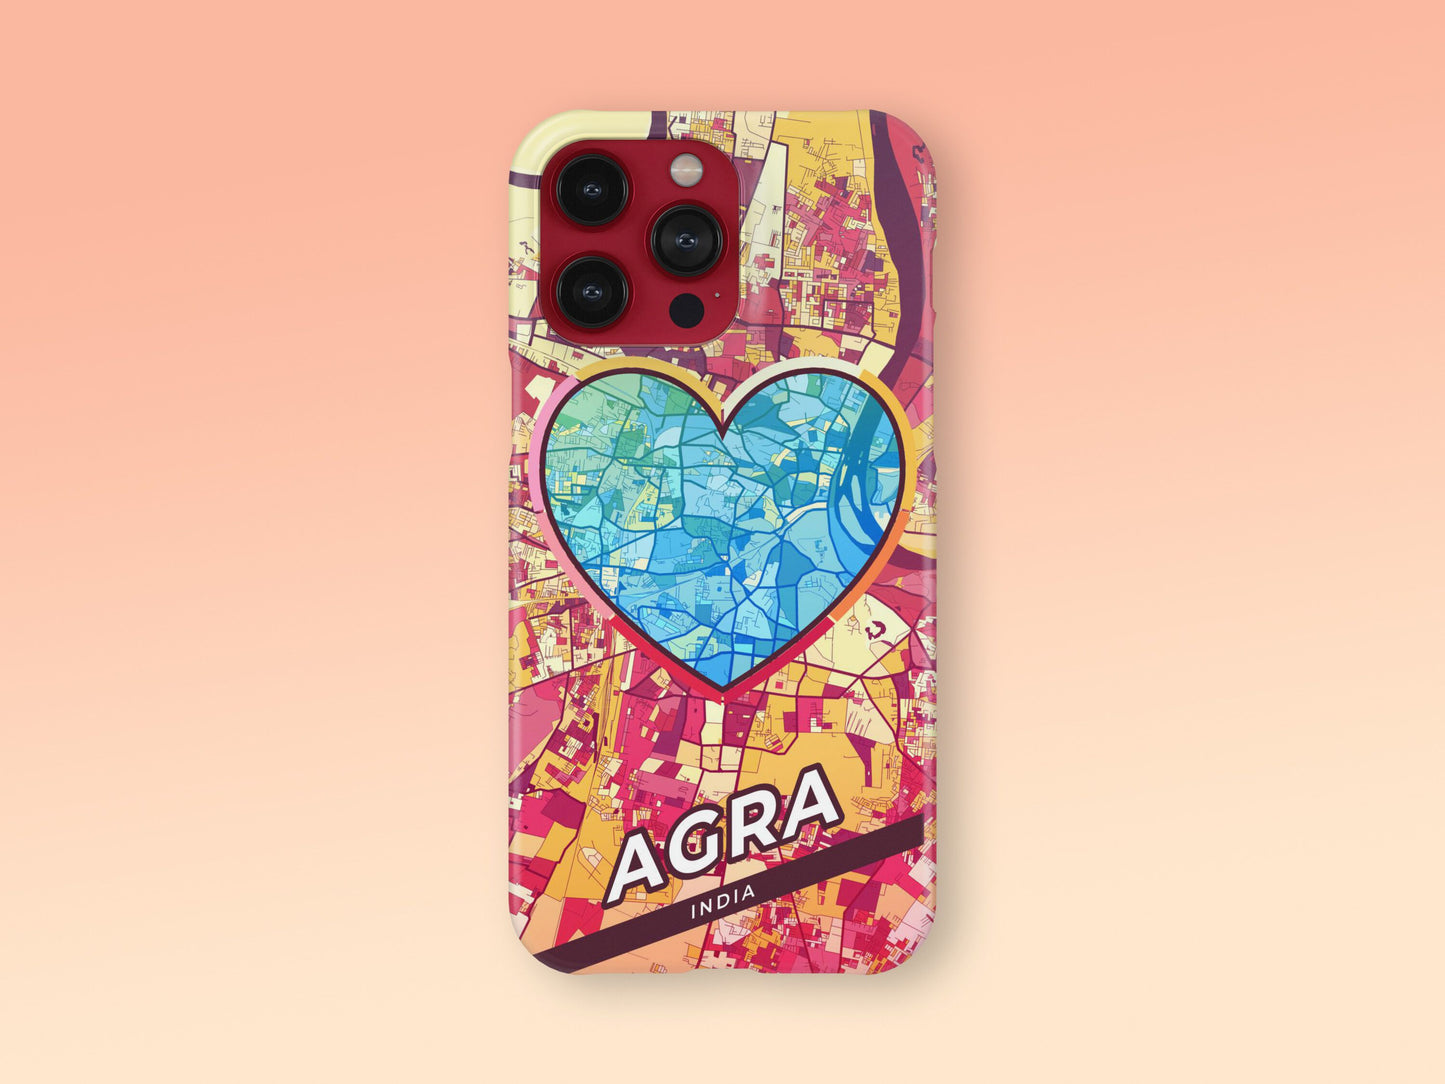 Agra India slim phone case with colorful icon. Birthday, wedding or housewarming gift. Couple match cases. 2